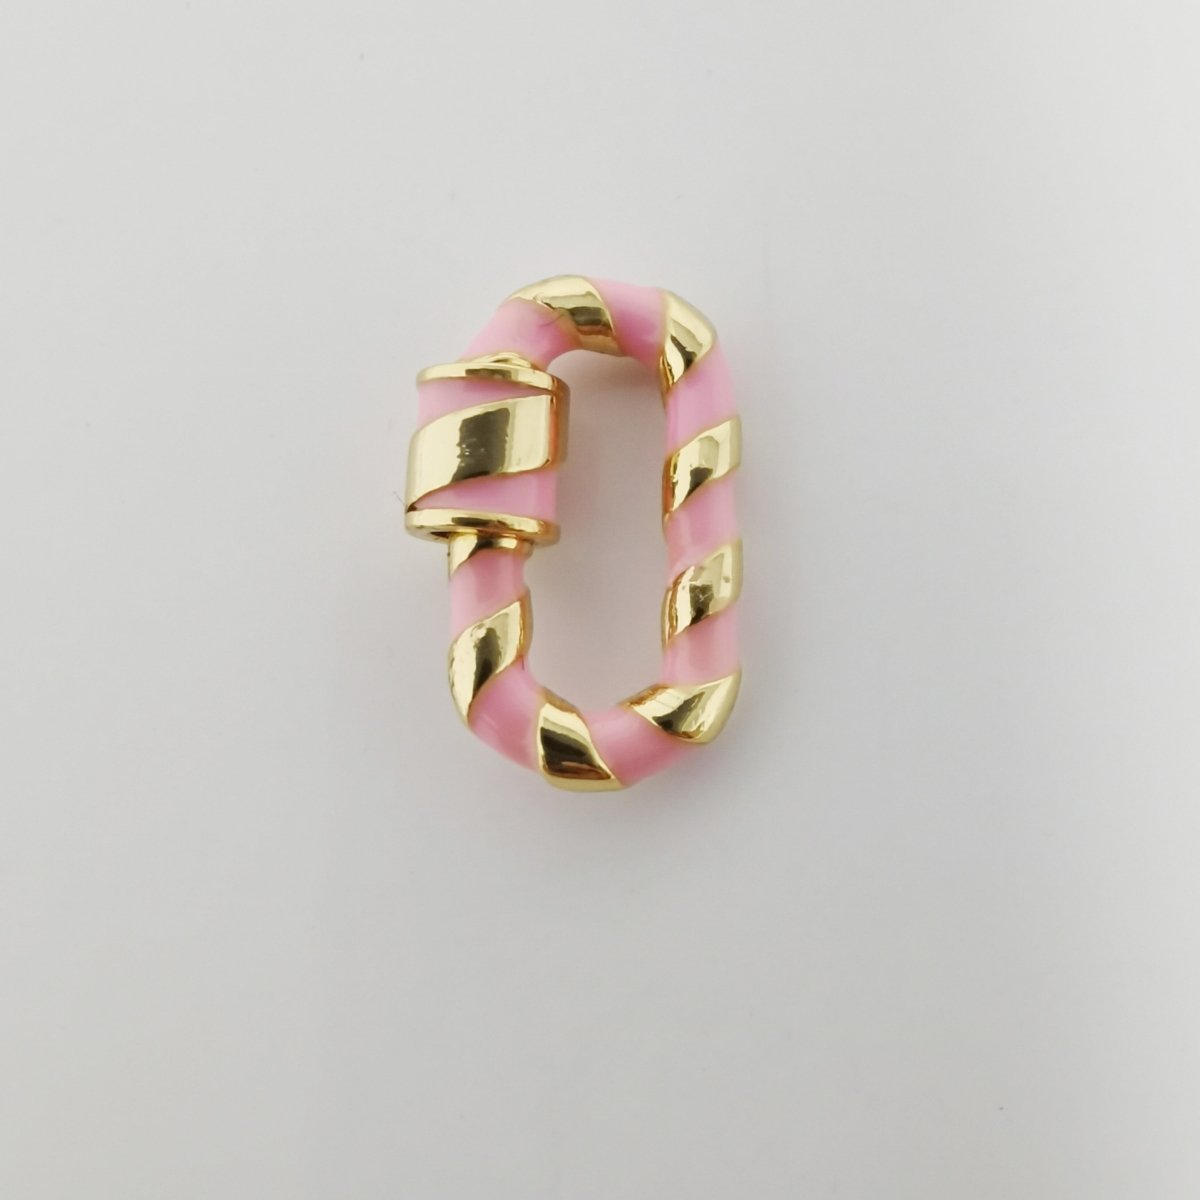 24K Gold-Plated Pink and Gold Paperclip Carabiner, Candy Cane Swirl Design, Circle Screw Clasp - DLUXCA